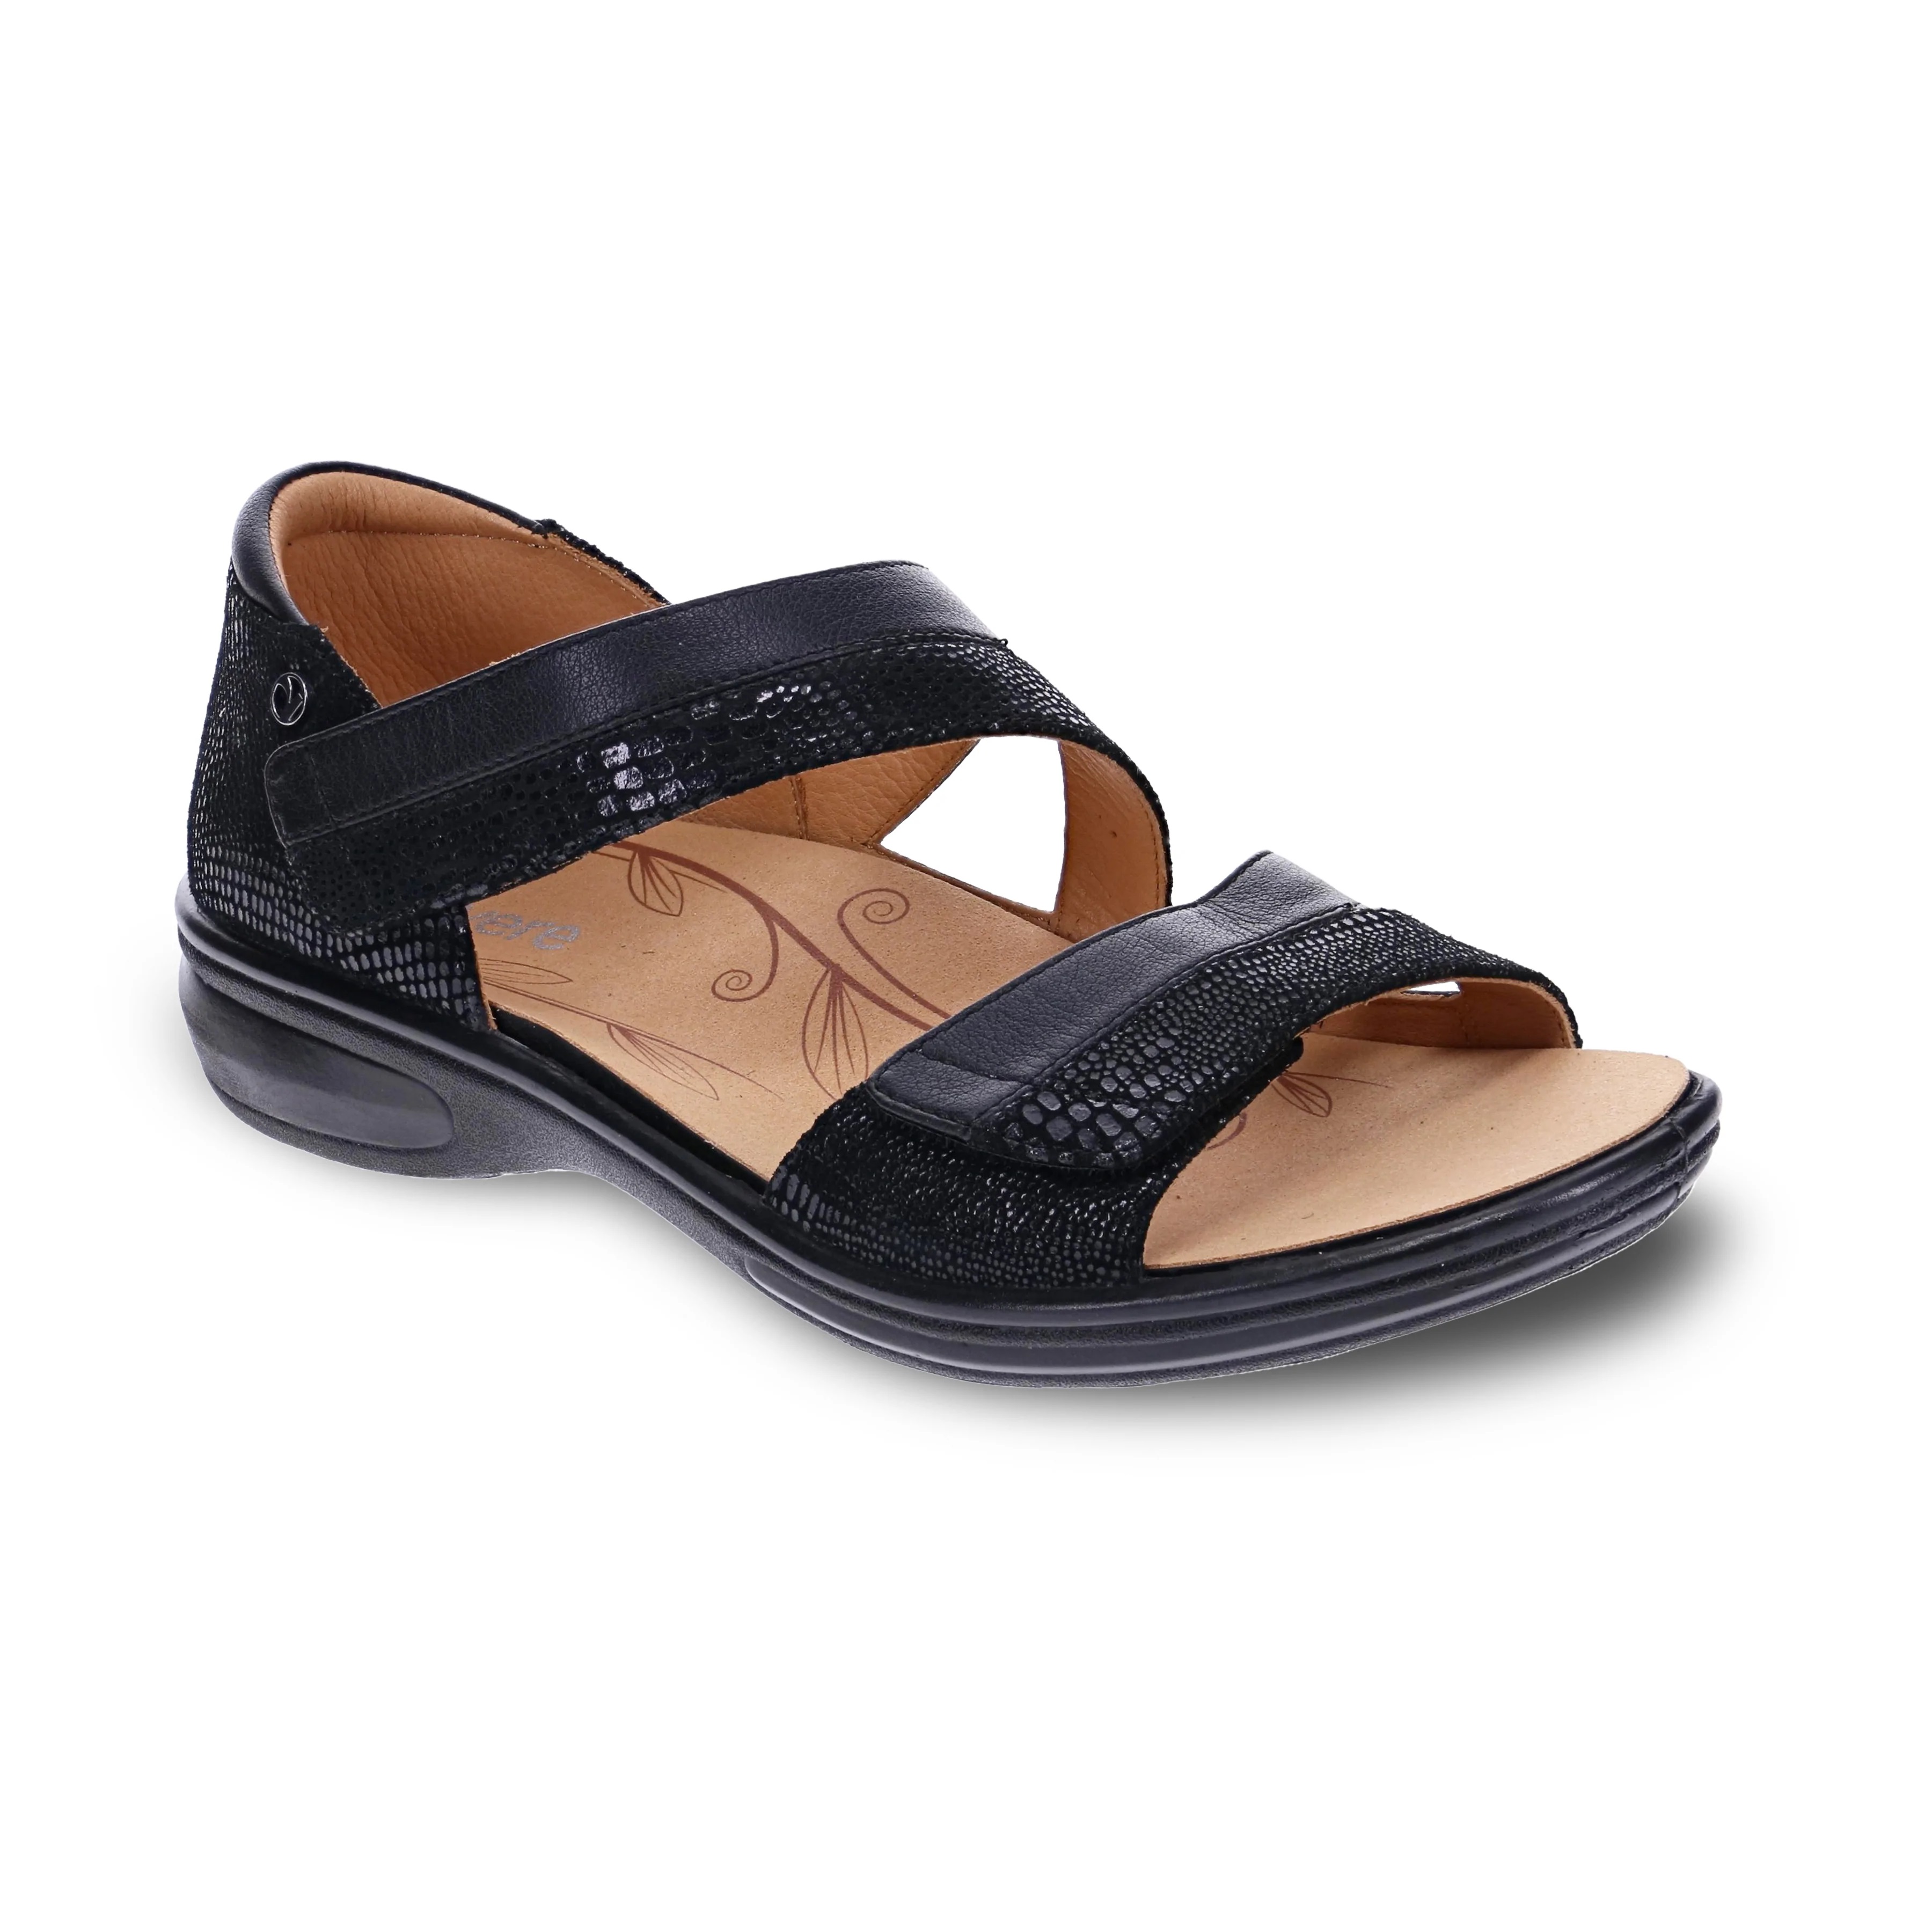 Revere Mauritius Women's Closed Heel Sandal - Removable Foot Beds - Wide